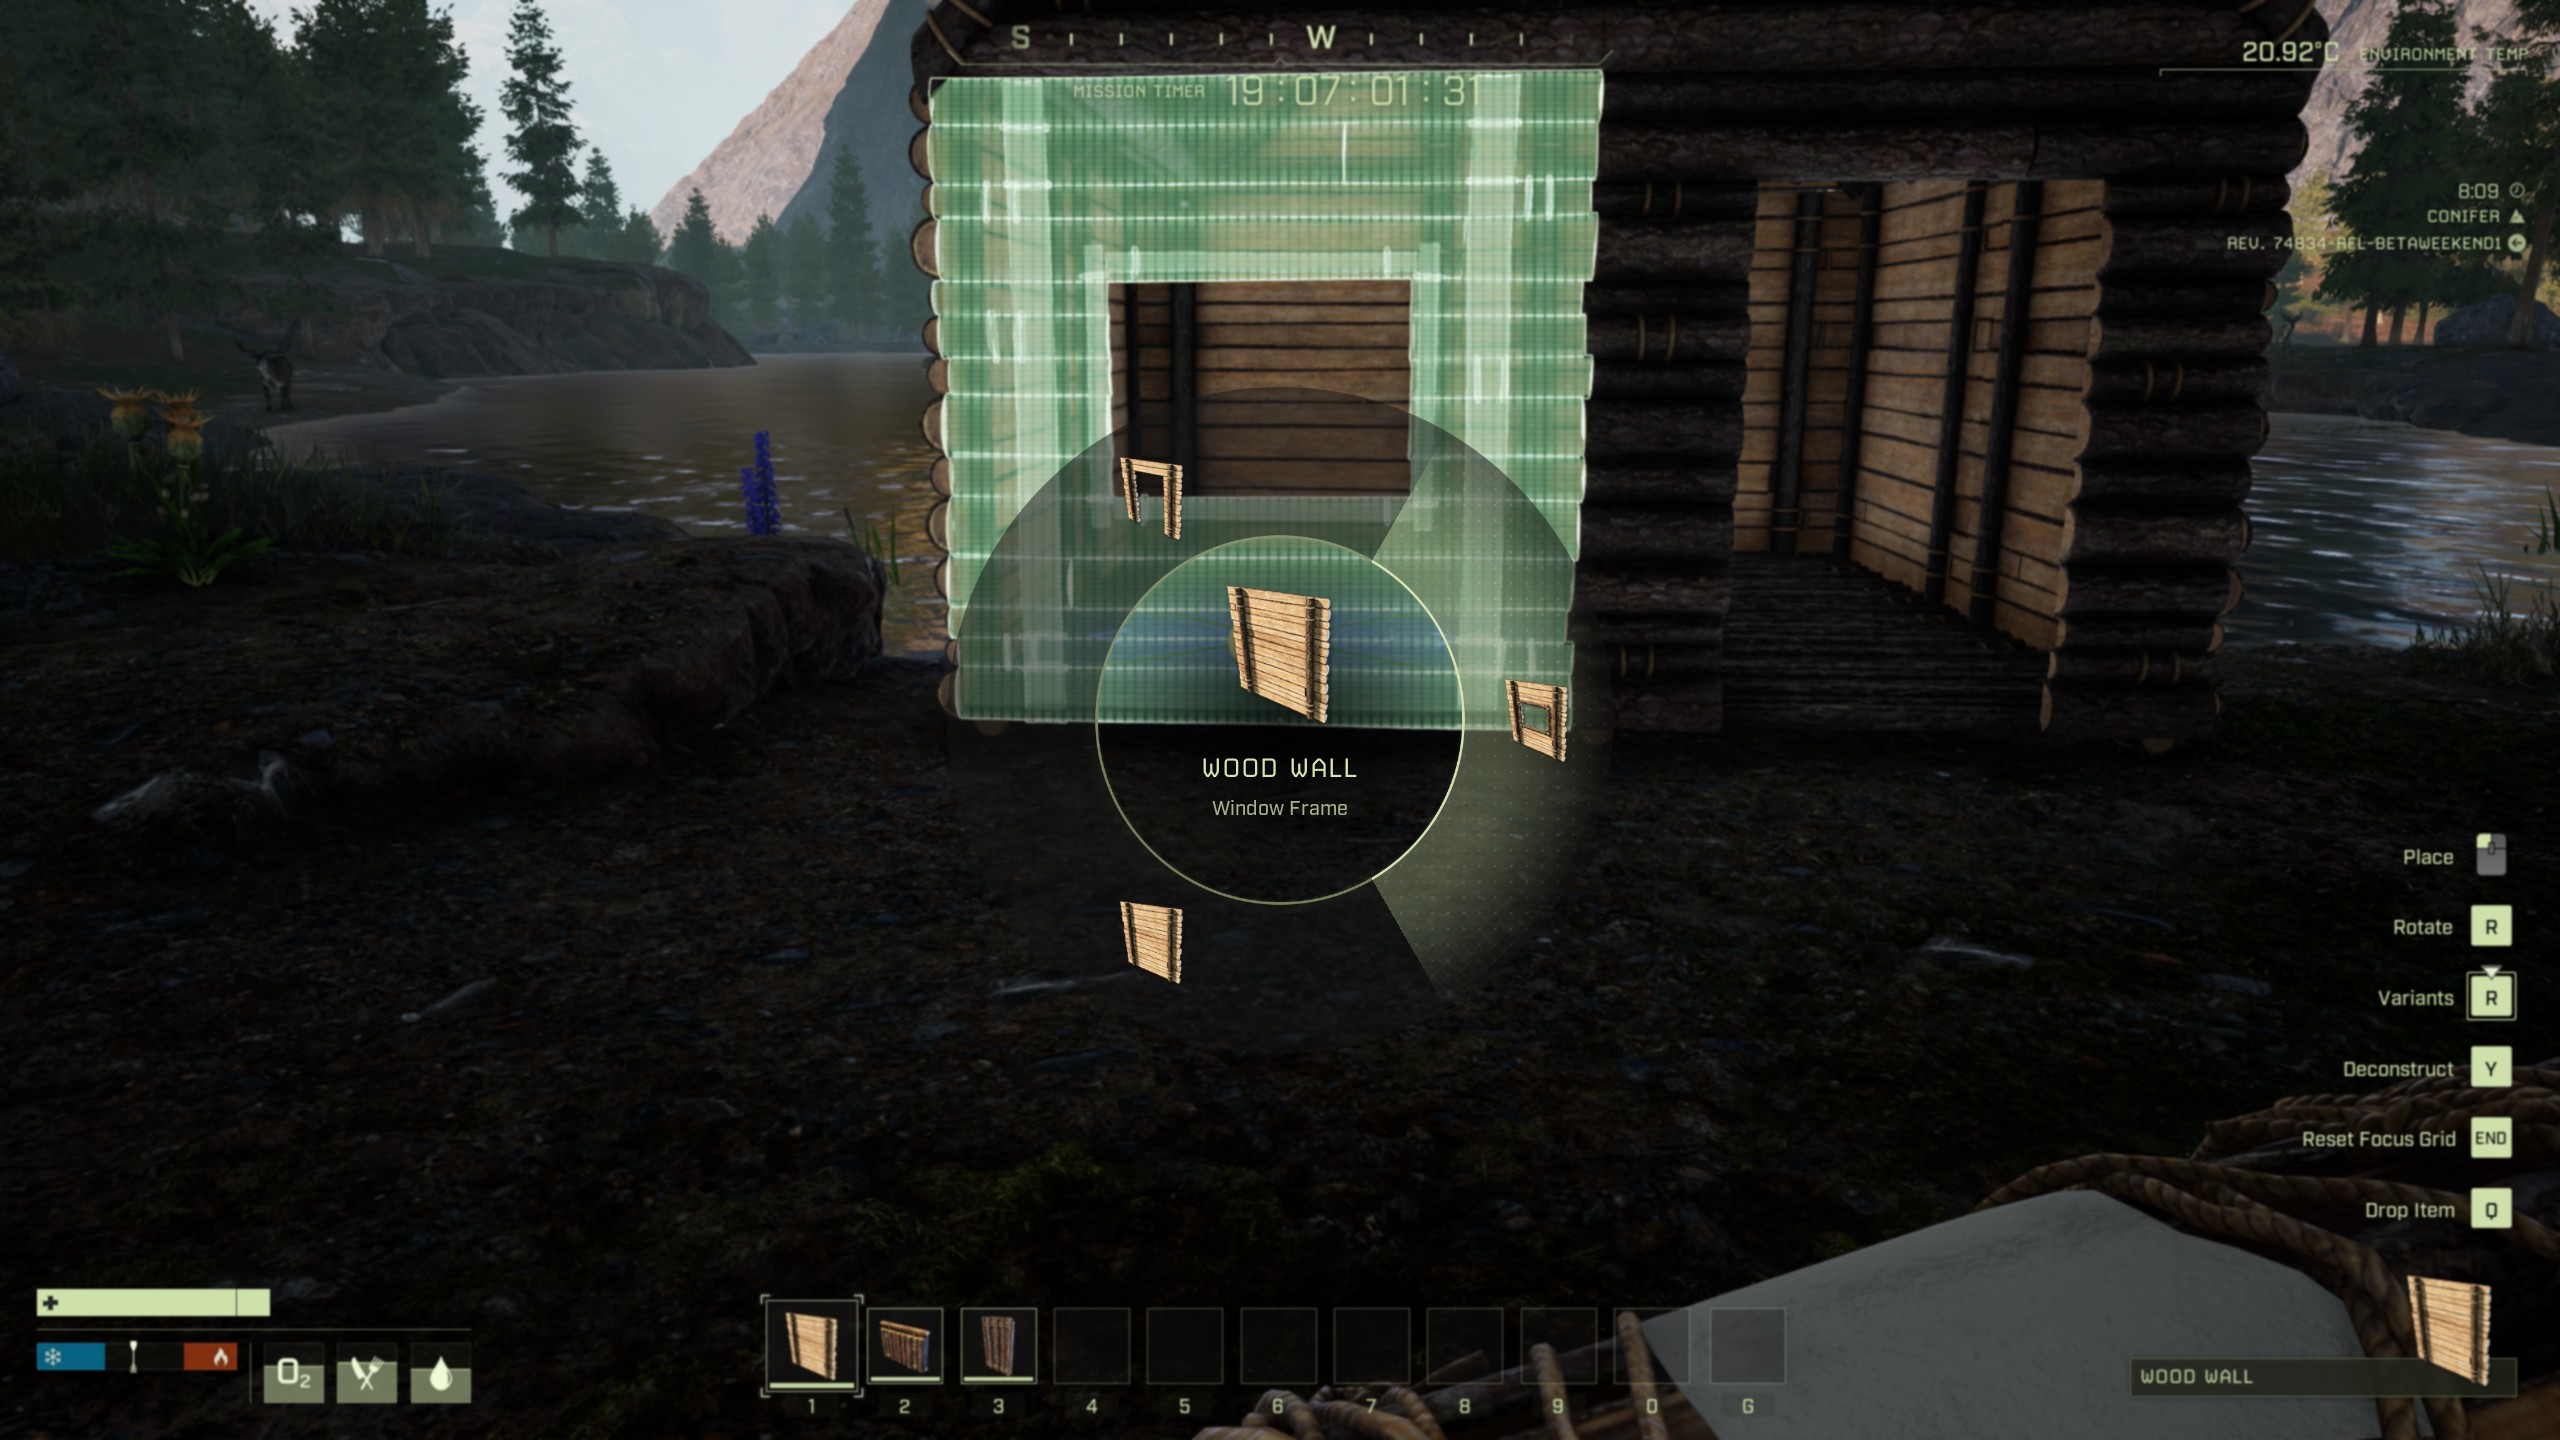 Icarus Beta Basic Guide for Building a House - Step 7: Repeat Steps 4 - 6 but select the Window Frame - 46881F4